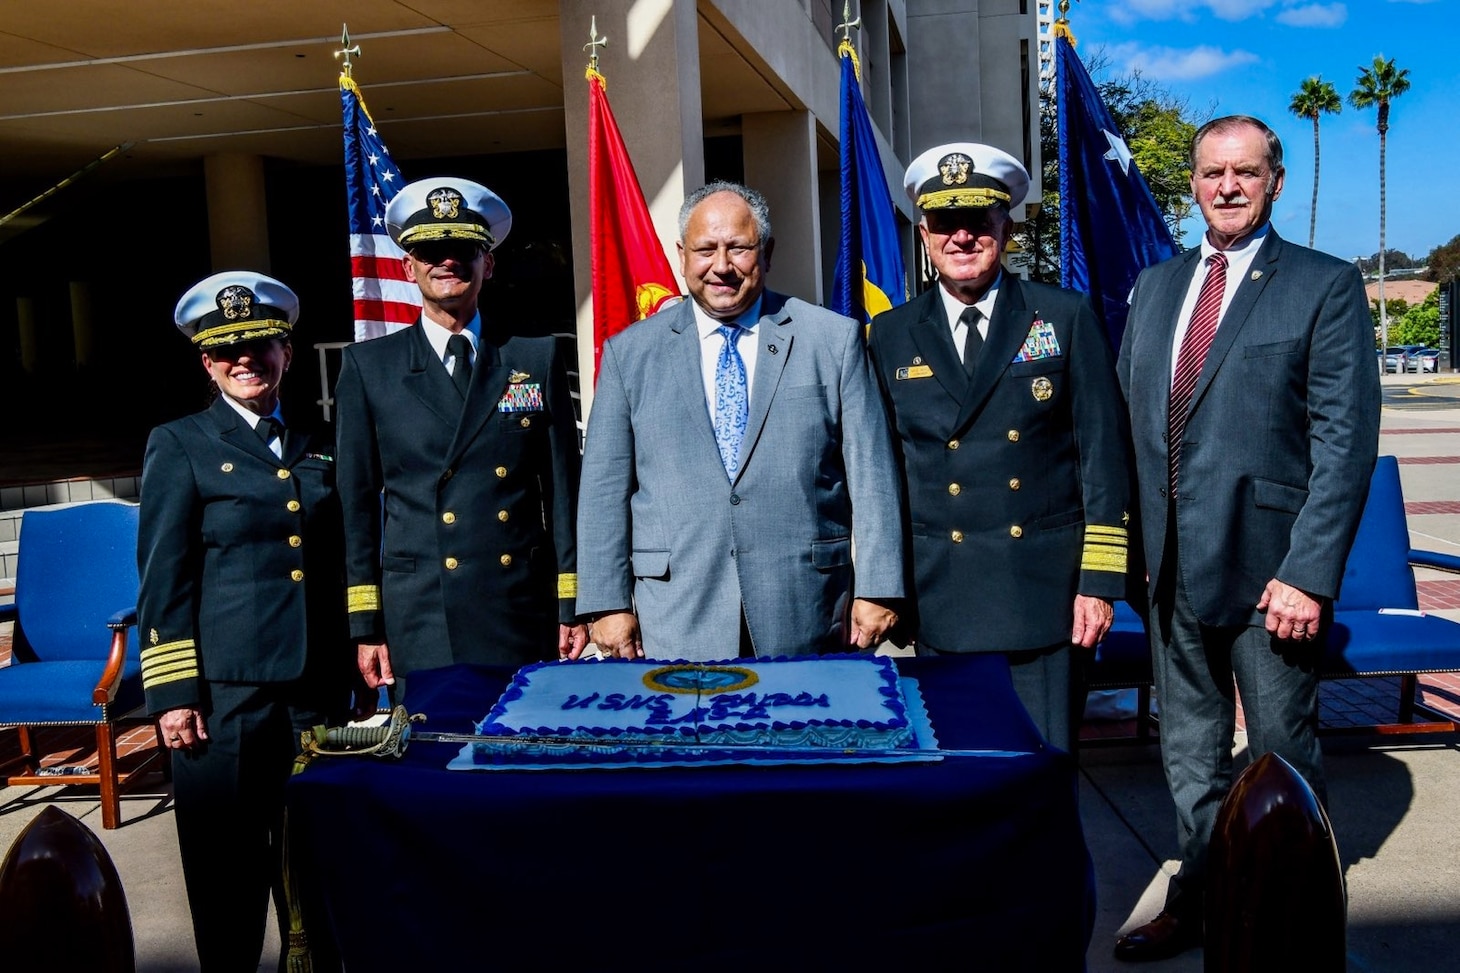 Capt. Elizabeth Adriano, Commanding Officer, Navy Medicine Readiness and Training Command San Diego; Rear Adm. Guido F. Valdes, Commander, Naval Medical Forces Pacific; Secretary of the Navy Carlos Del Toro; Vice Adm. Michael E. Boyle, Commander, U.S. Third Fleet; and Paul Williamson, Wounded Warrior Regiment, pose for a photo during a ceremony at Naval Medical Center San Diego, Oct. 27. At the ceremony, Secretary Del Toro announced that a future Bethesda-class expeditionary medical ship will be named USNS Balboa (EMS 2), The future USNS Balboa honors the legacy and commitment of Navy doctors, nurses, corpsmen, and staff of Balboa Naval Hospital in caring for the needs of U.S. Service Members.